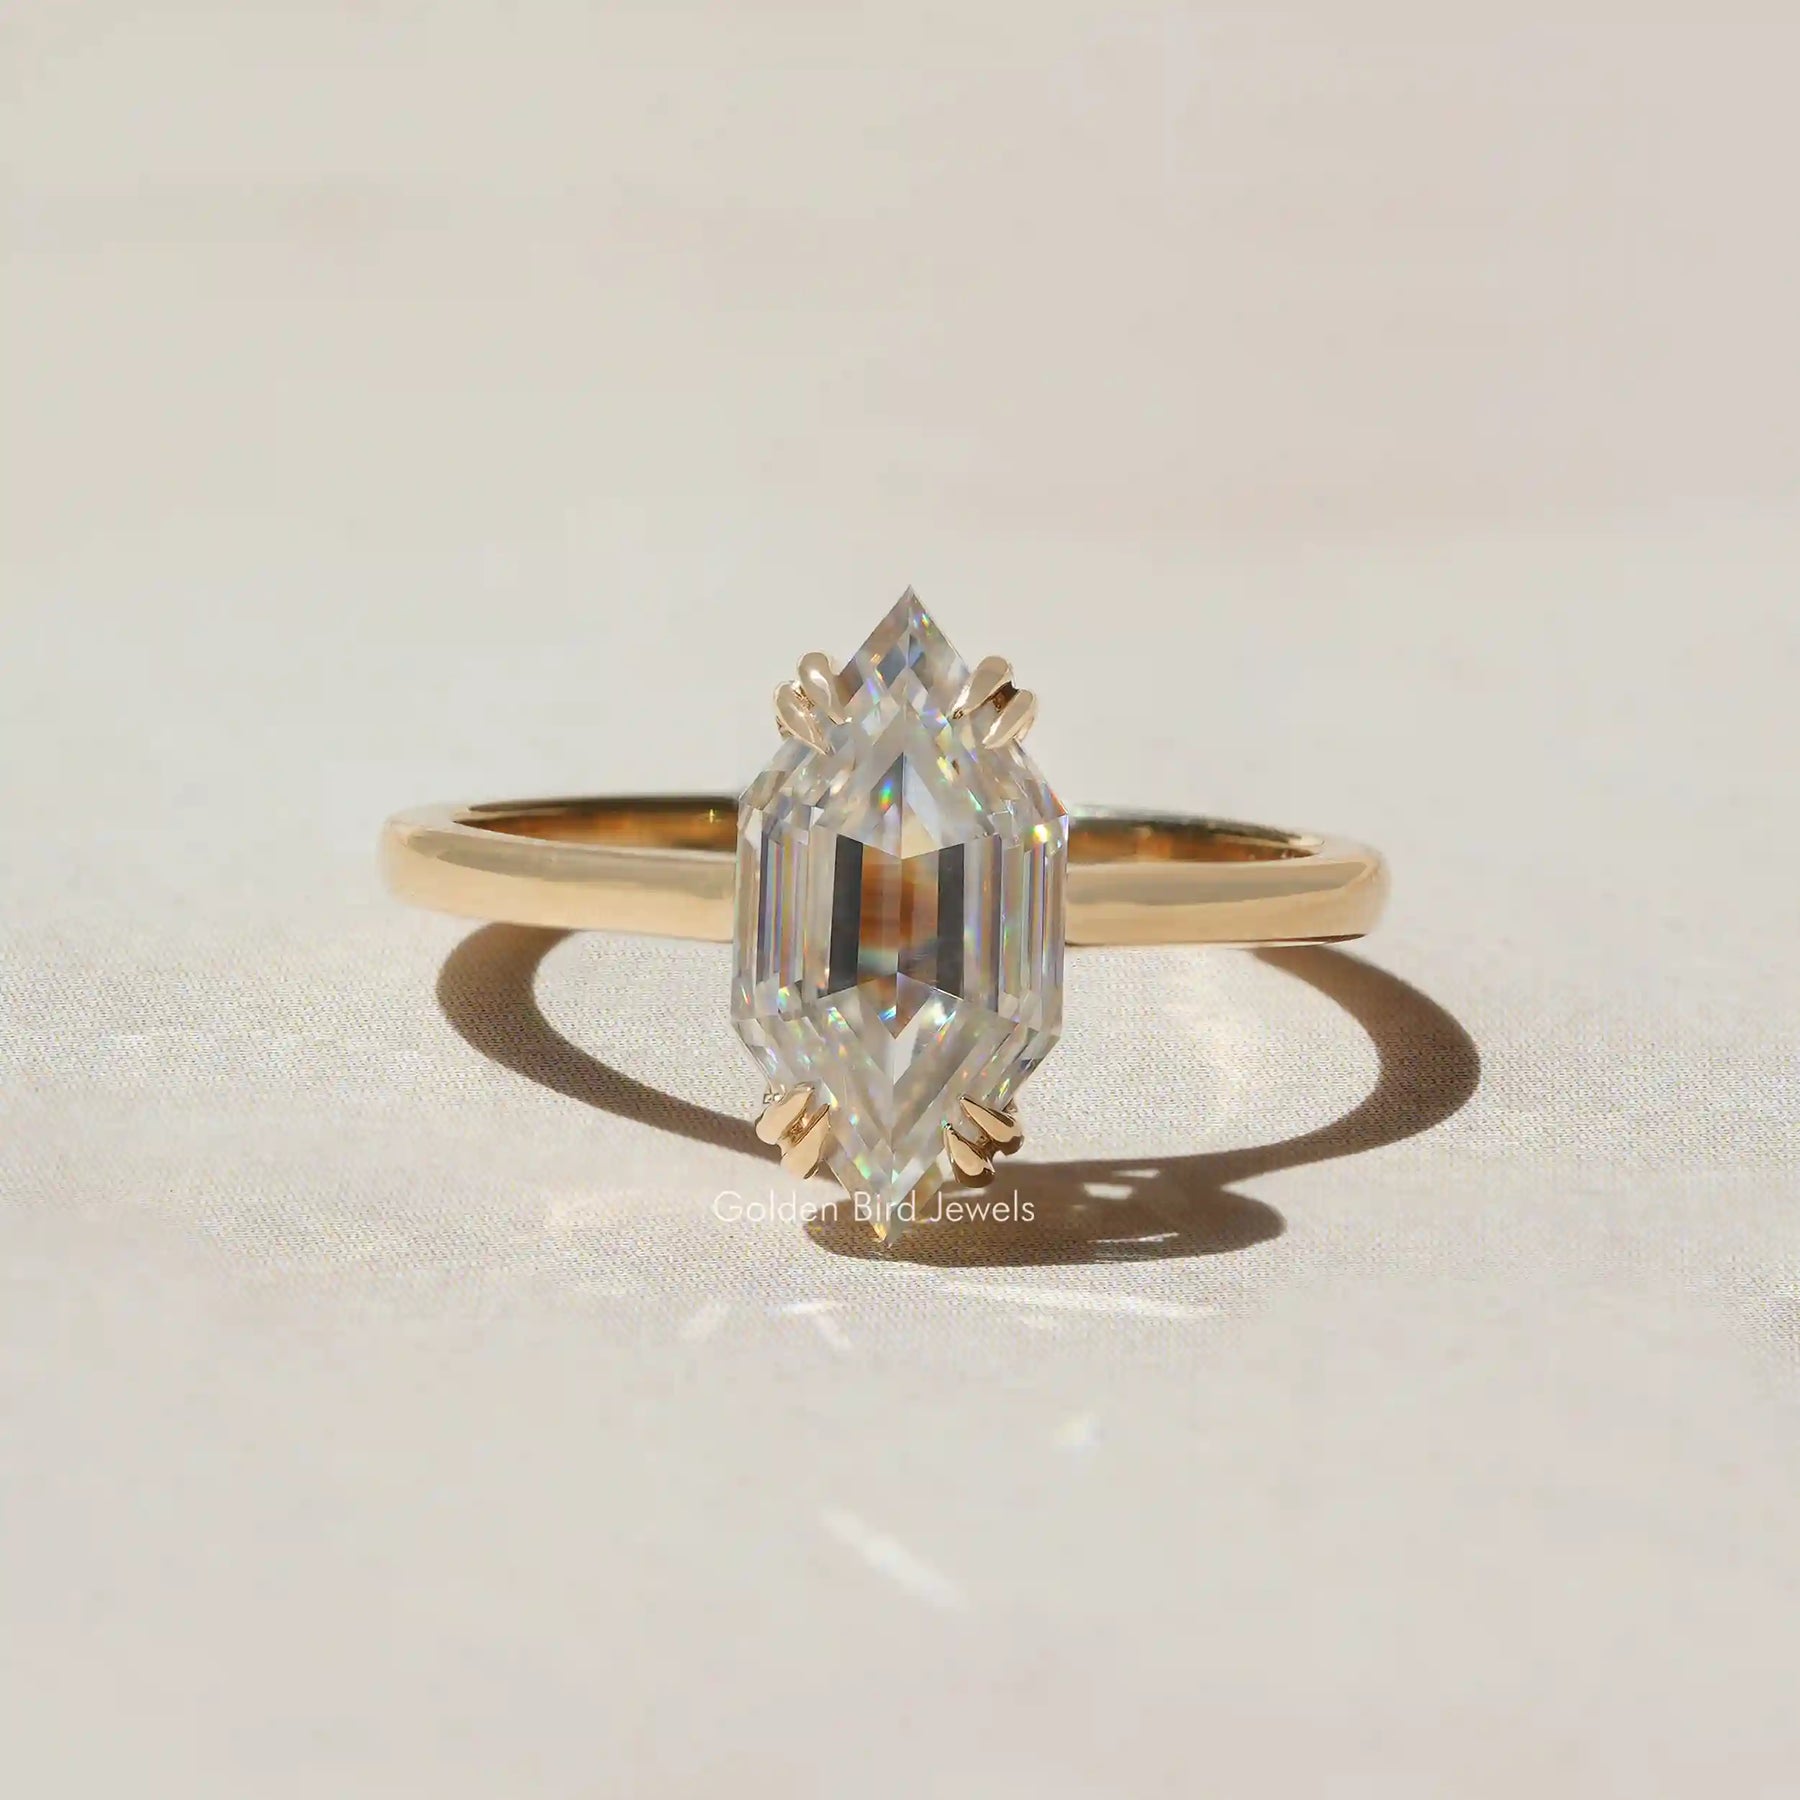 [Step Cut Dutch Marquise Moissanite Ring Set In Double Prongs]-[Golden Bird Jewels]